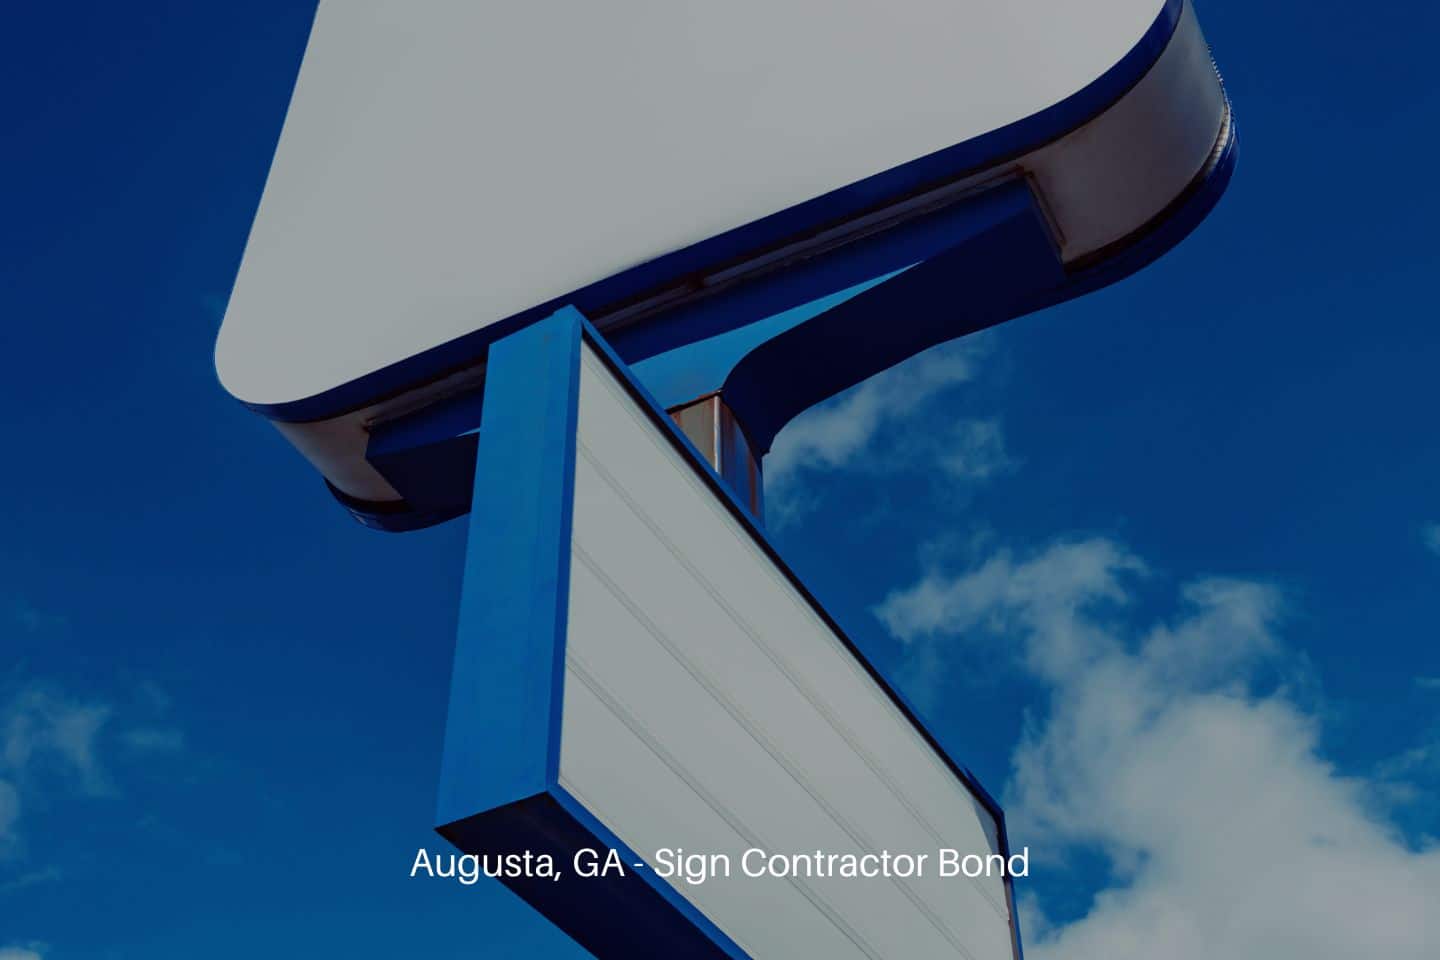 Augusta, GA - Sign Contractor Bond - A wide angle view of blank retail signage.